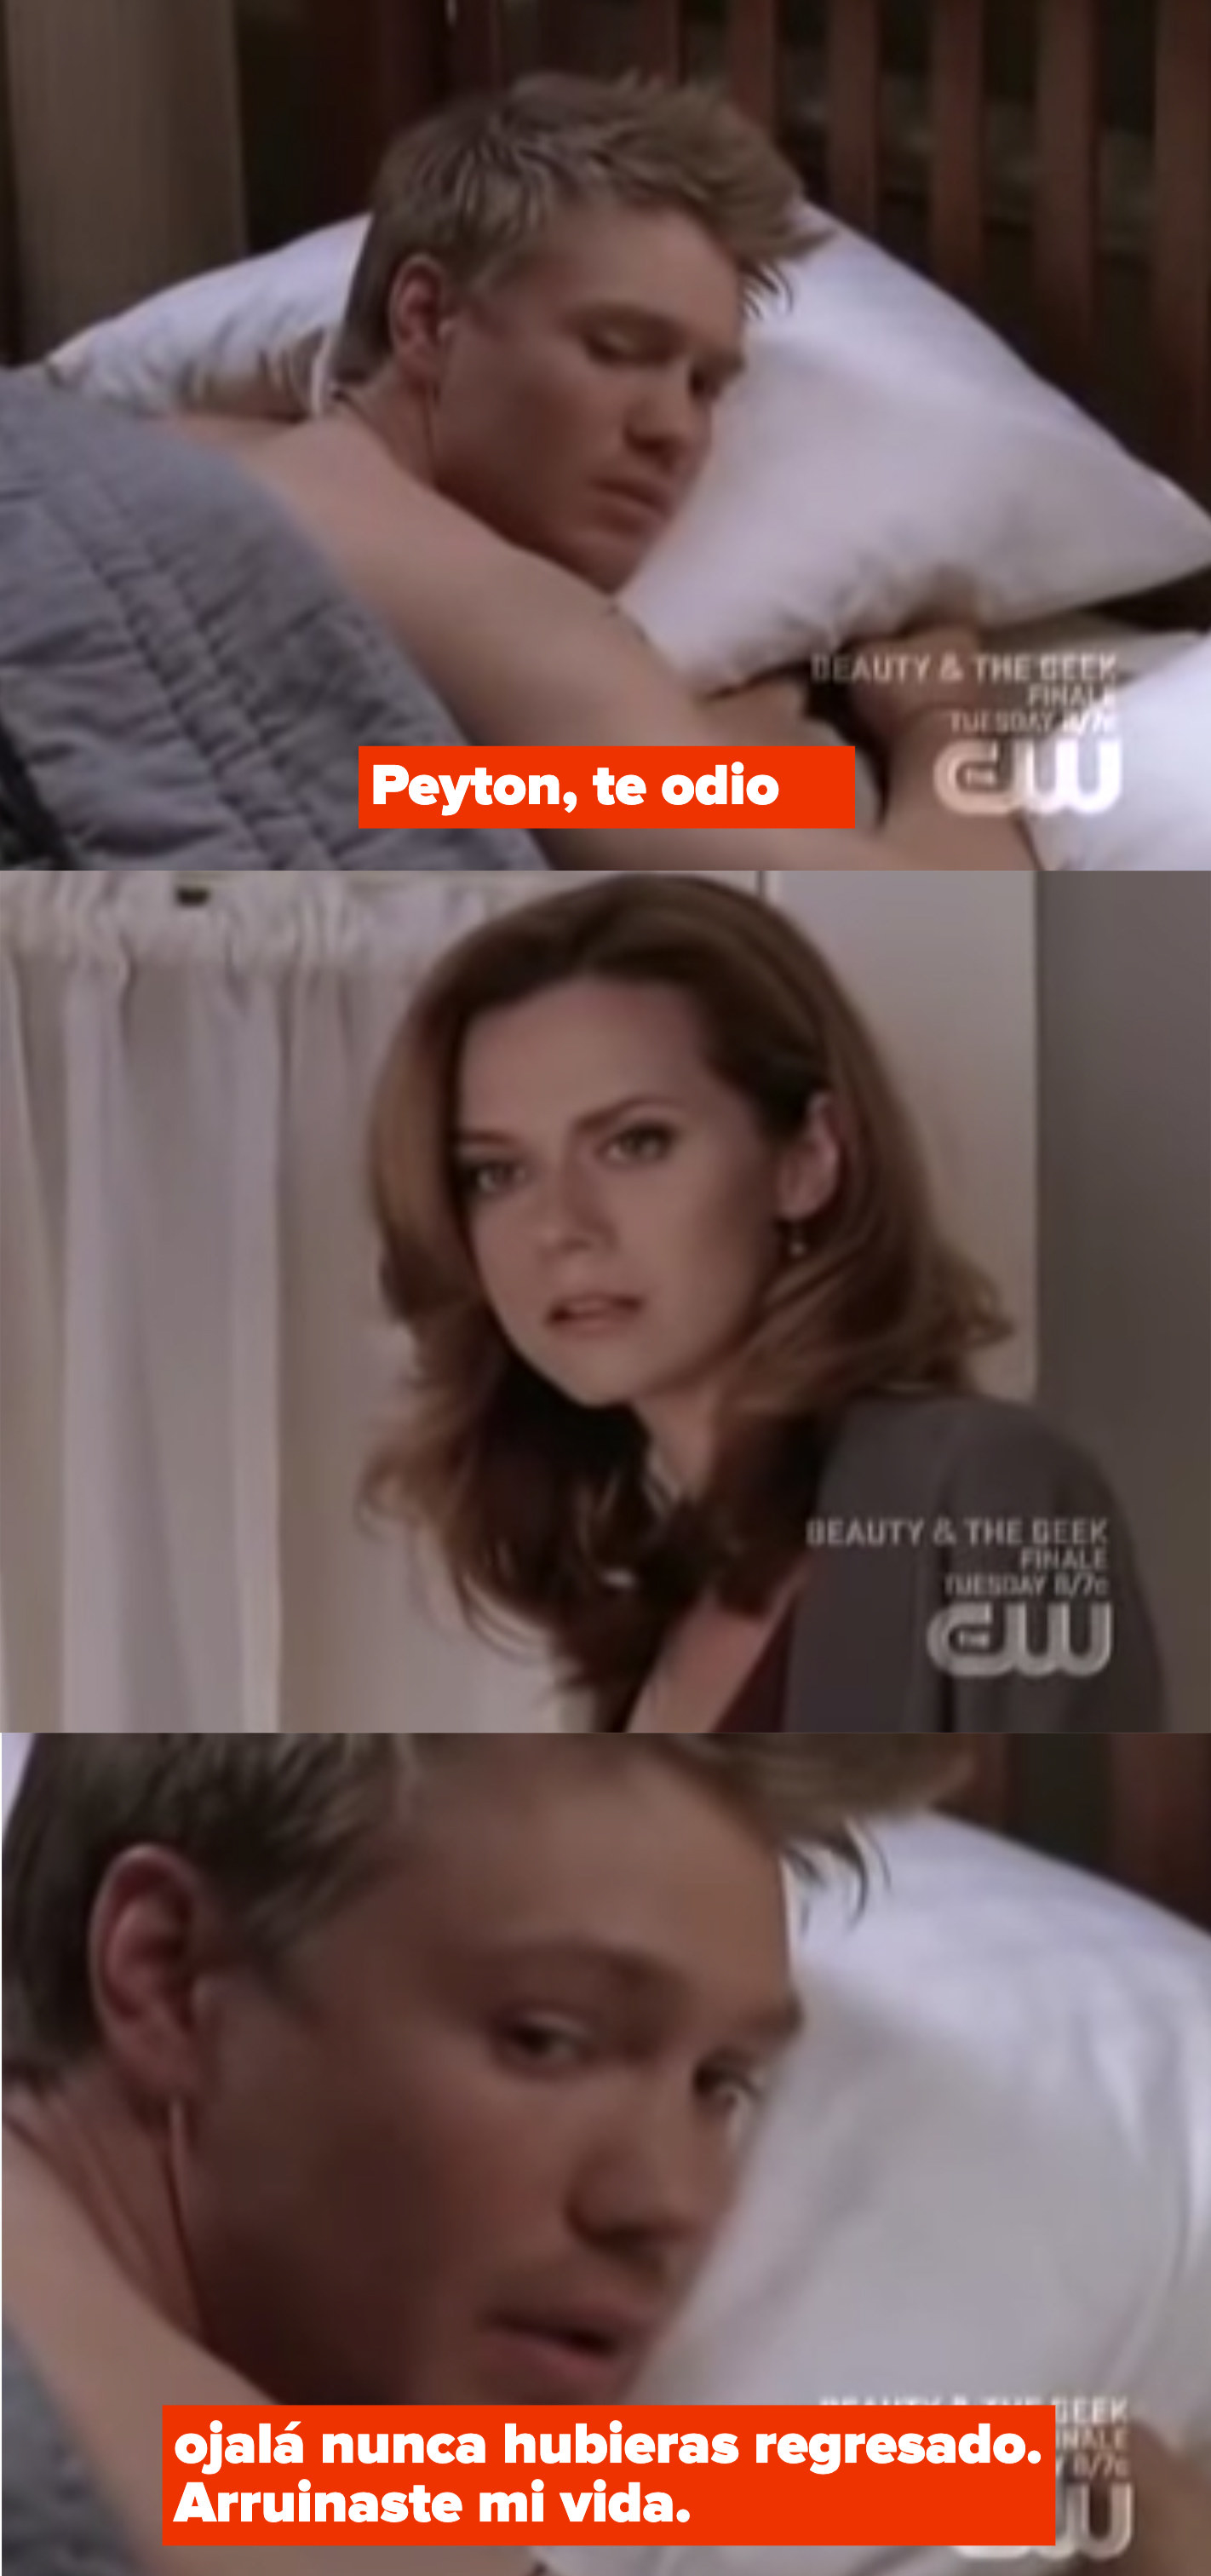 Lucas tells Peyton that he wishes she never came back because he hates her and that she ruined his life. 